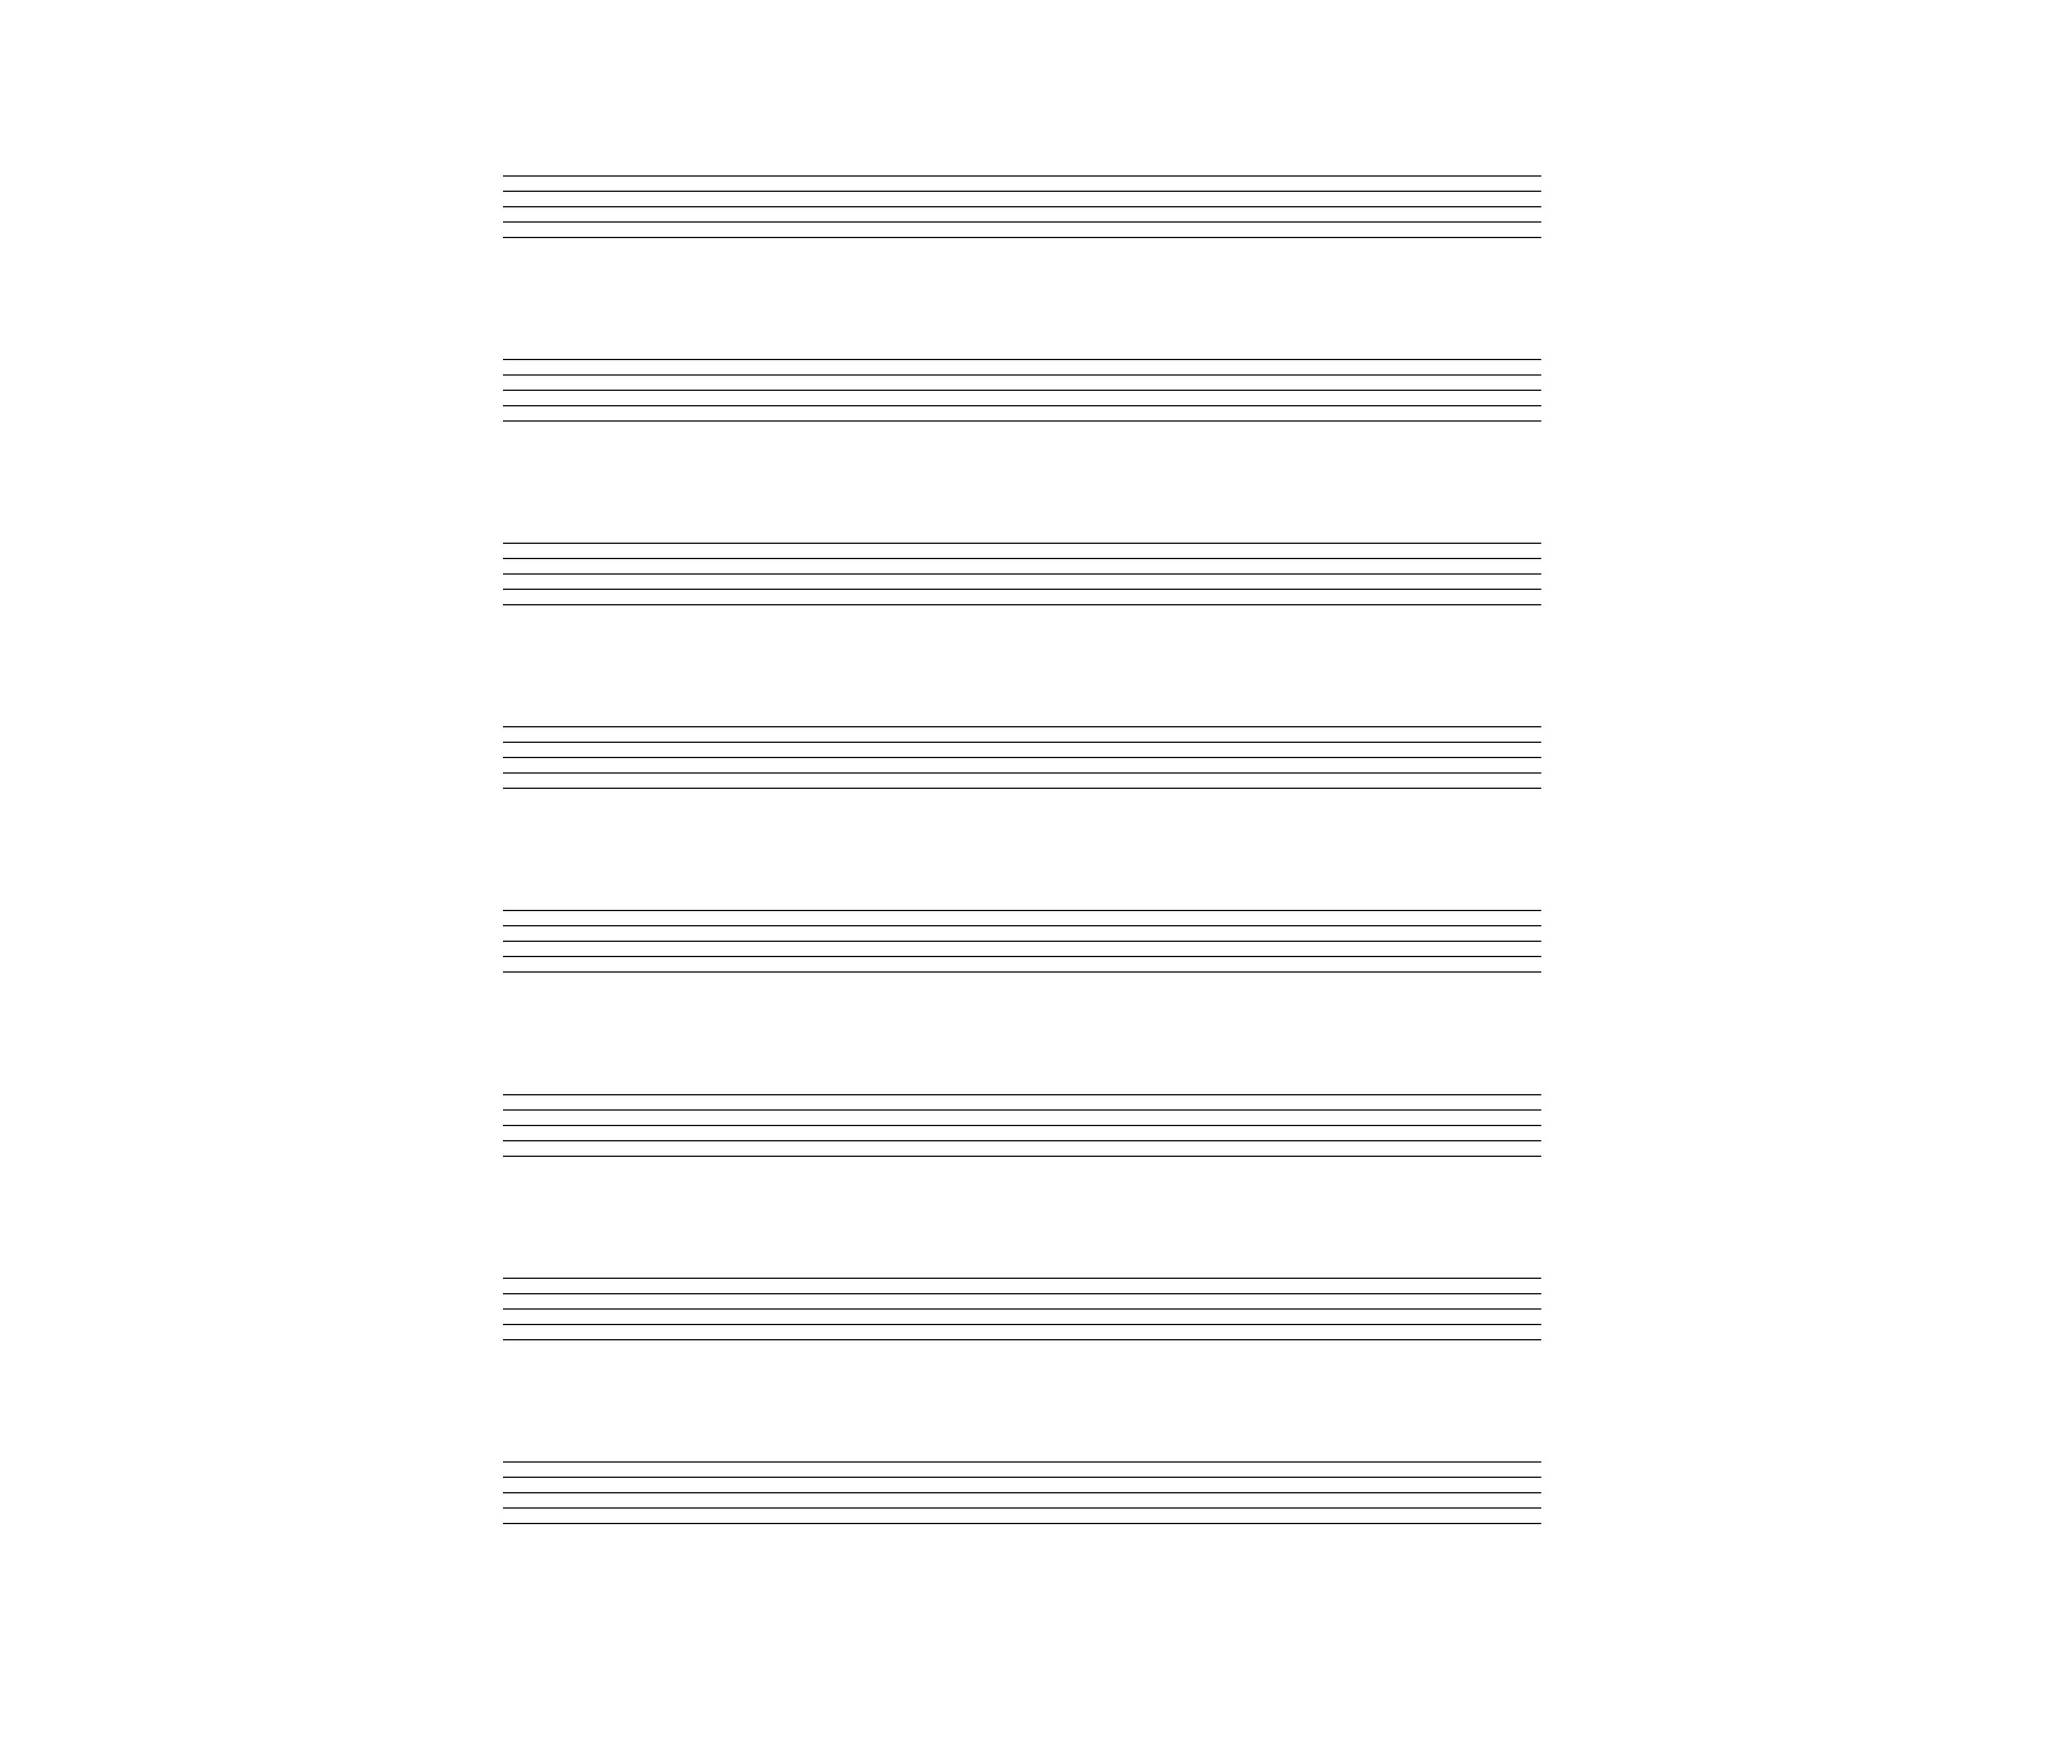 8-staves-without-clefs-blank-sheet-music